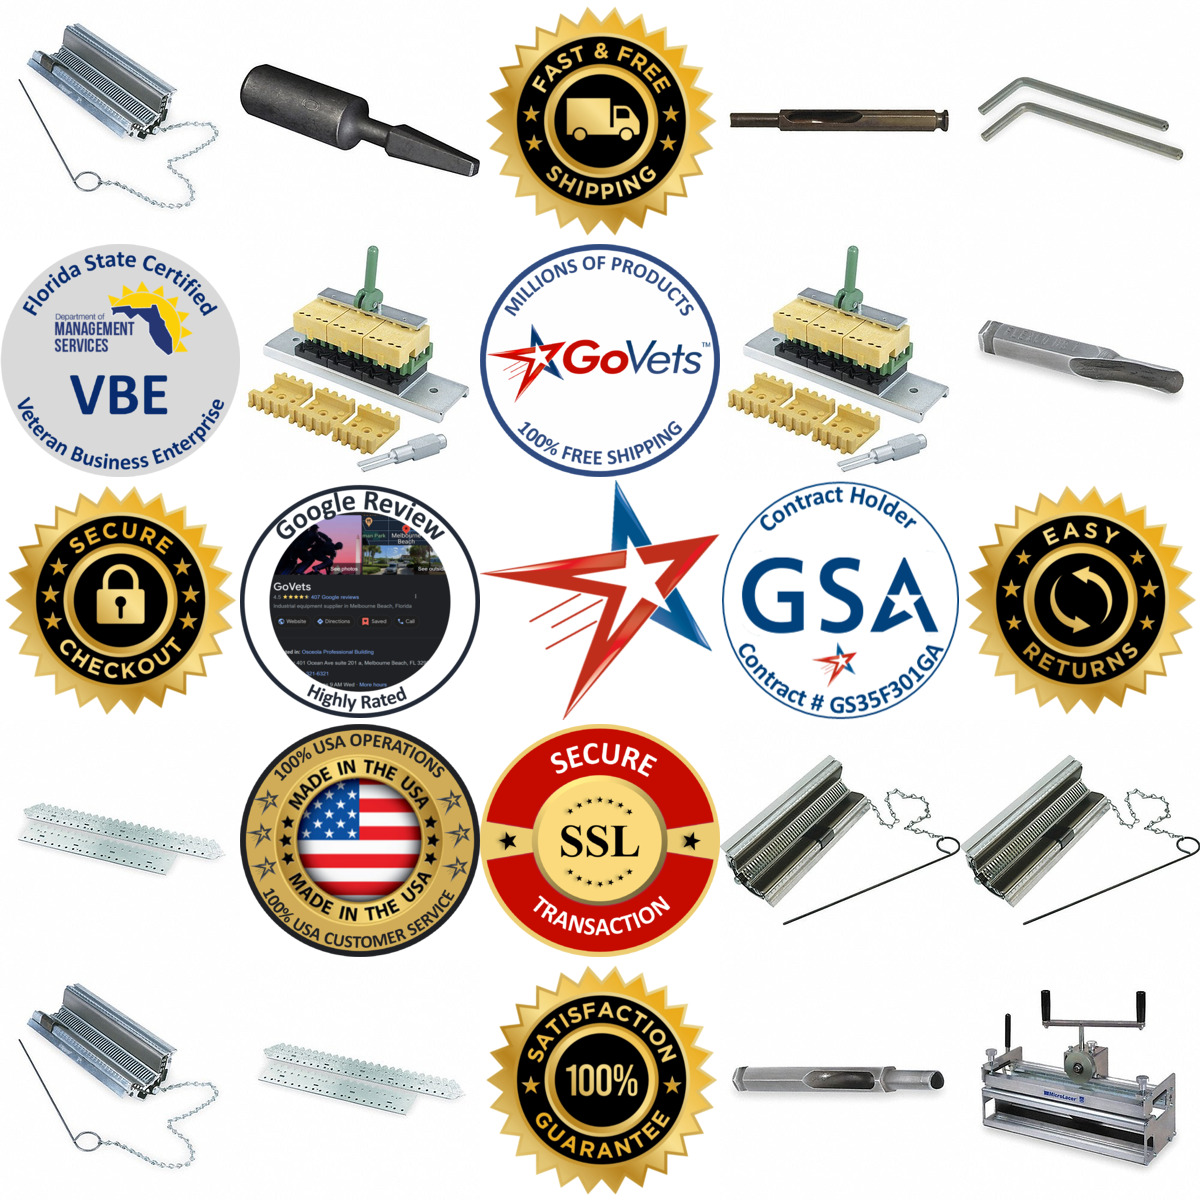 A selection of Conveyor Belt Lacing Tools products on GoVets